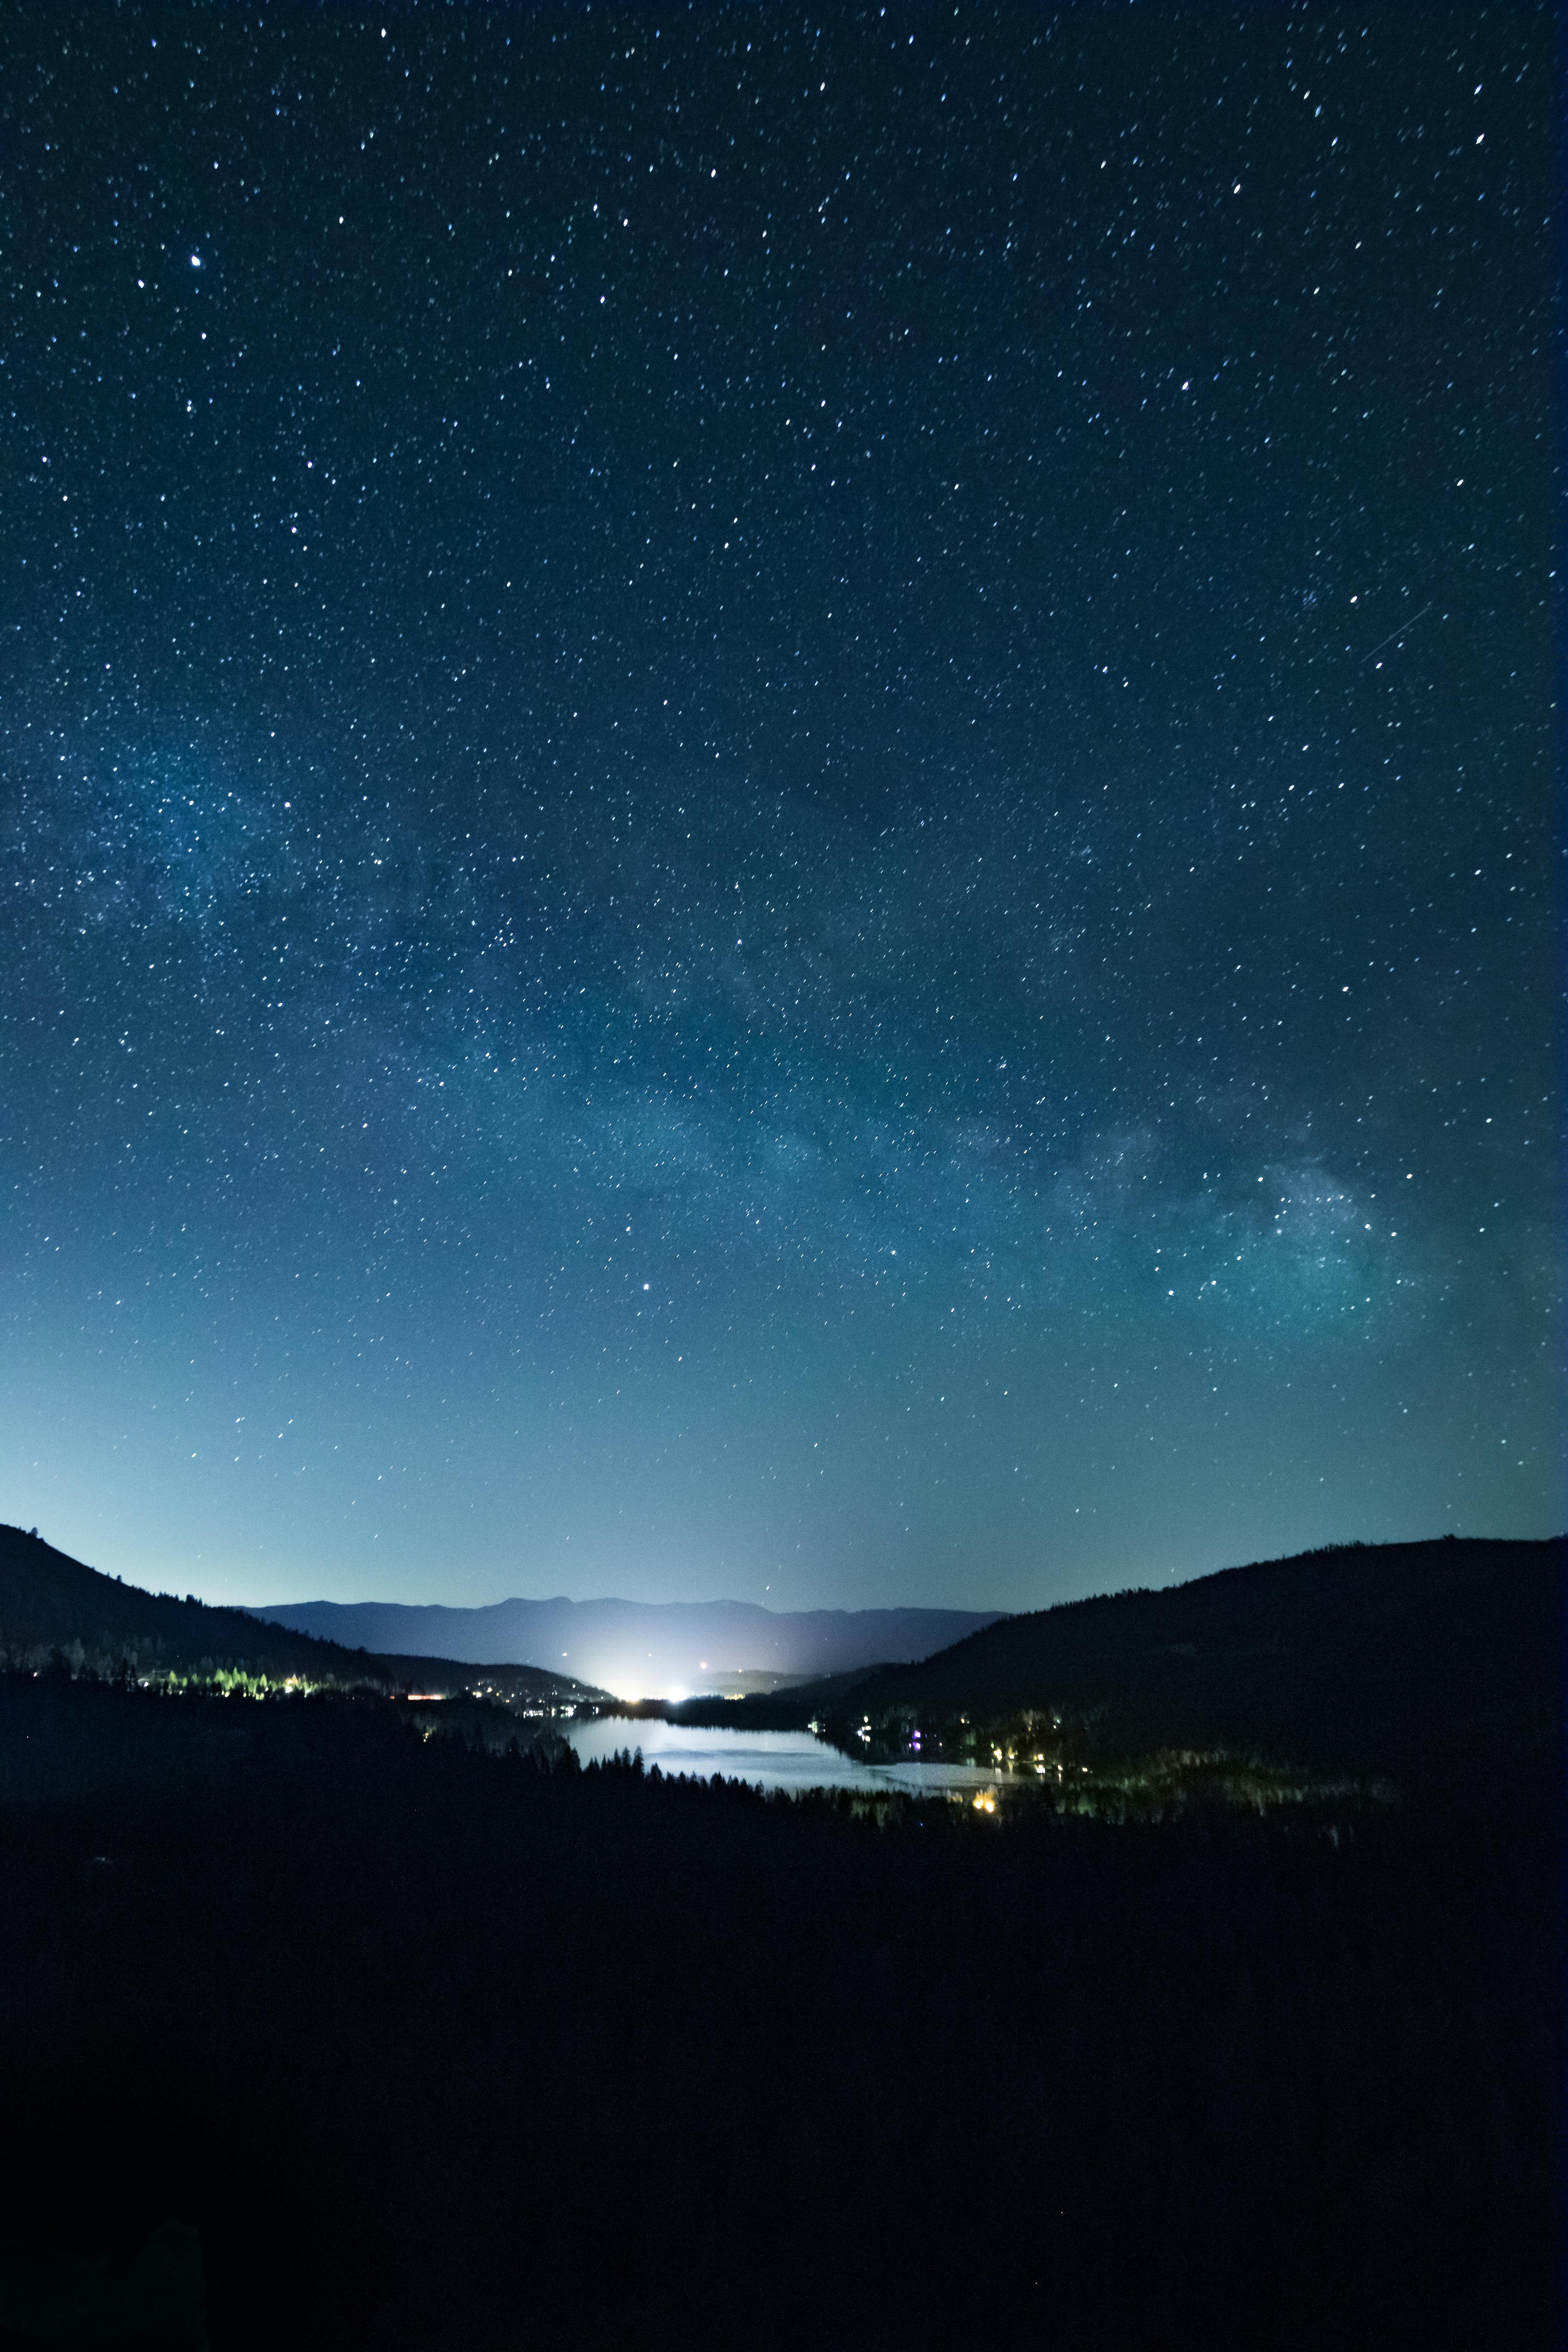 750 Starry Sky Pictures HD  Download Free Images on Unsplash